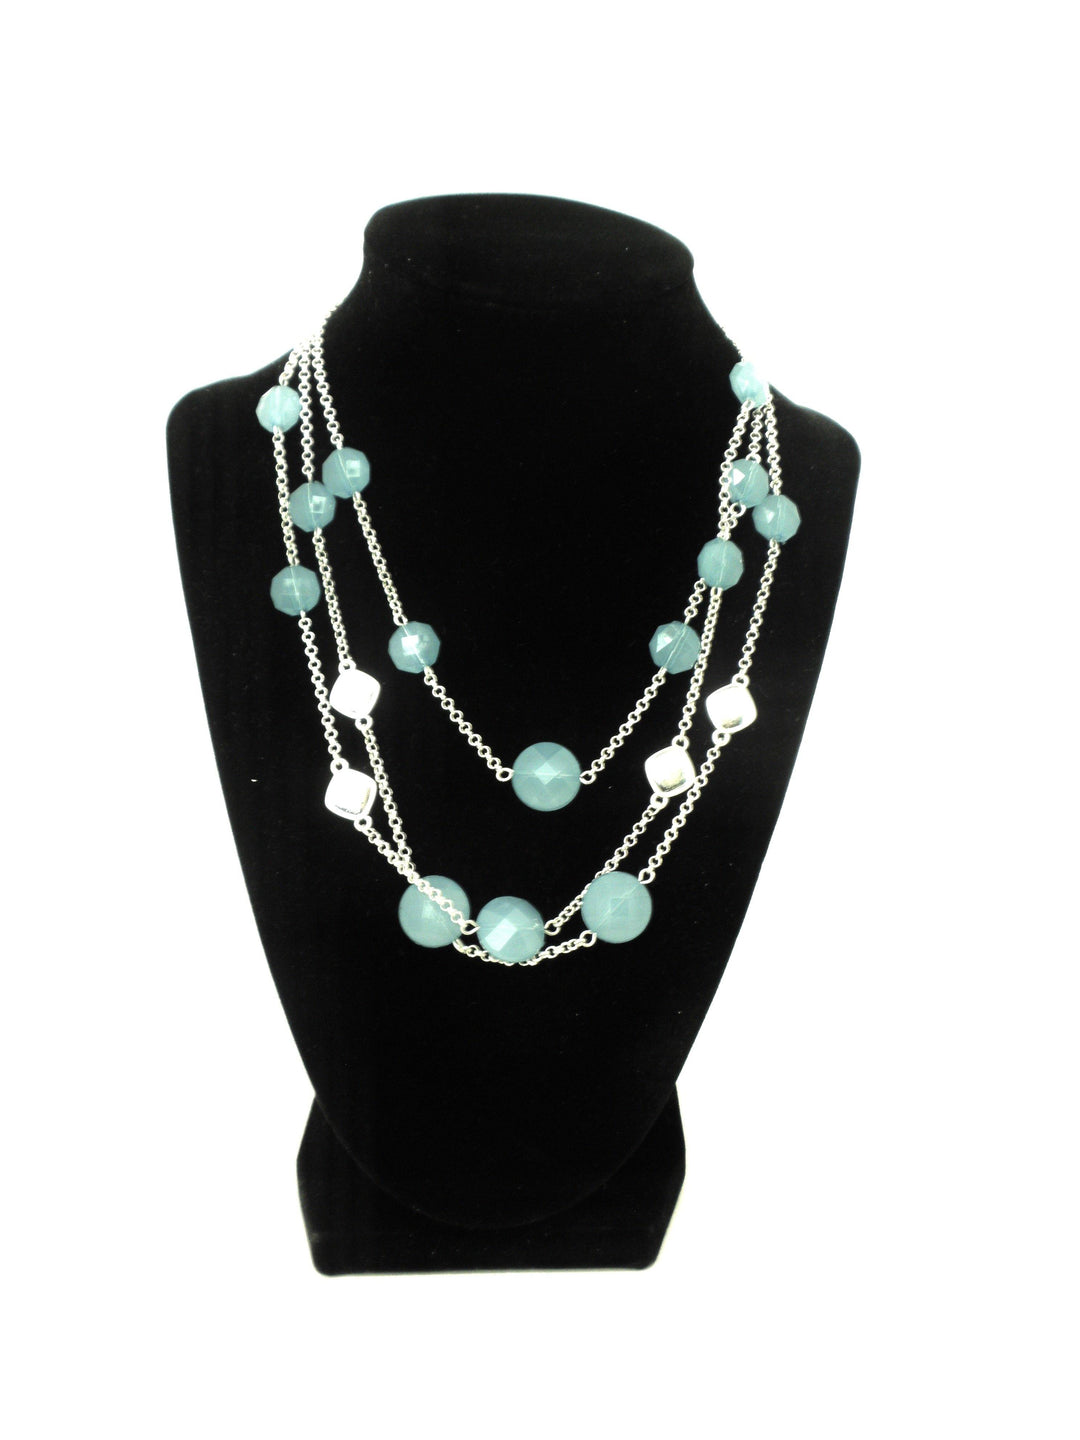 Necklace with Light Blue and Silver Gems - The Fashion Foundation - {{ discount designer}}